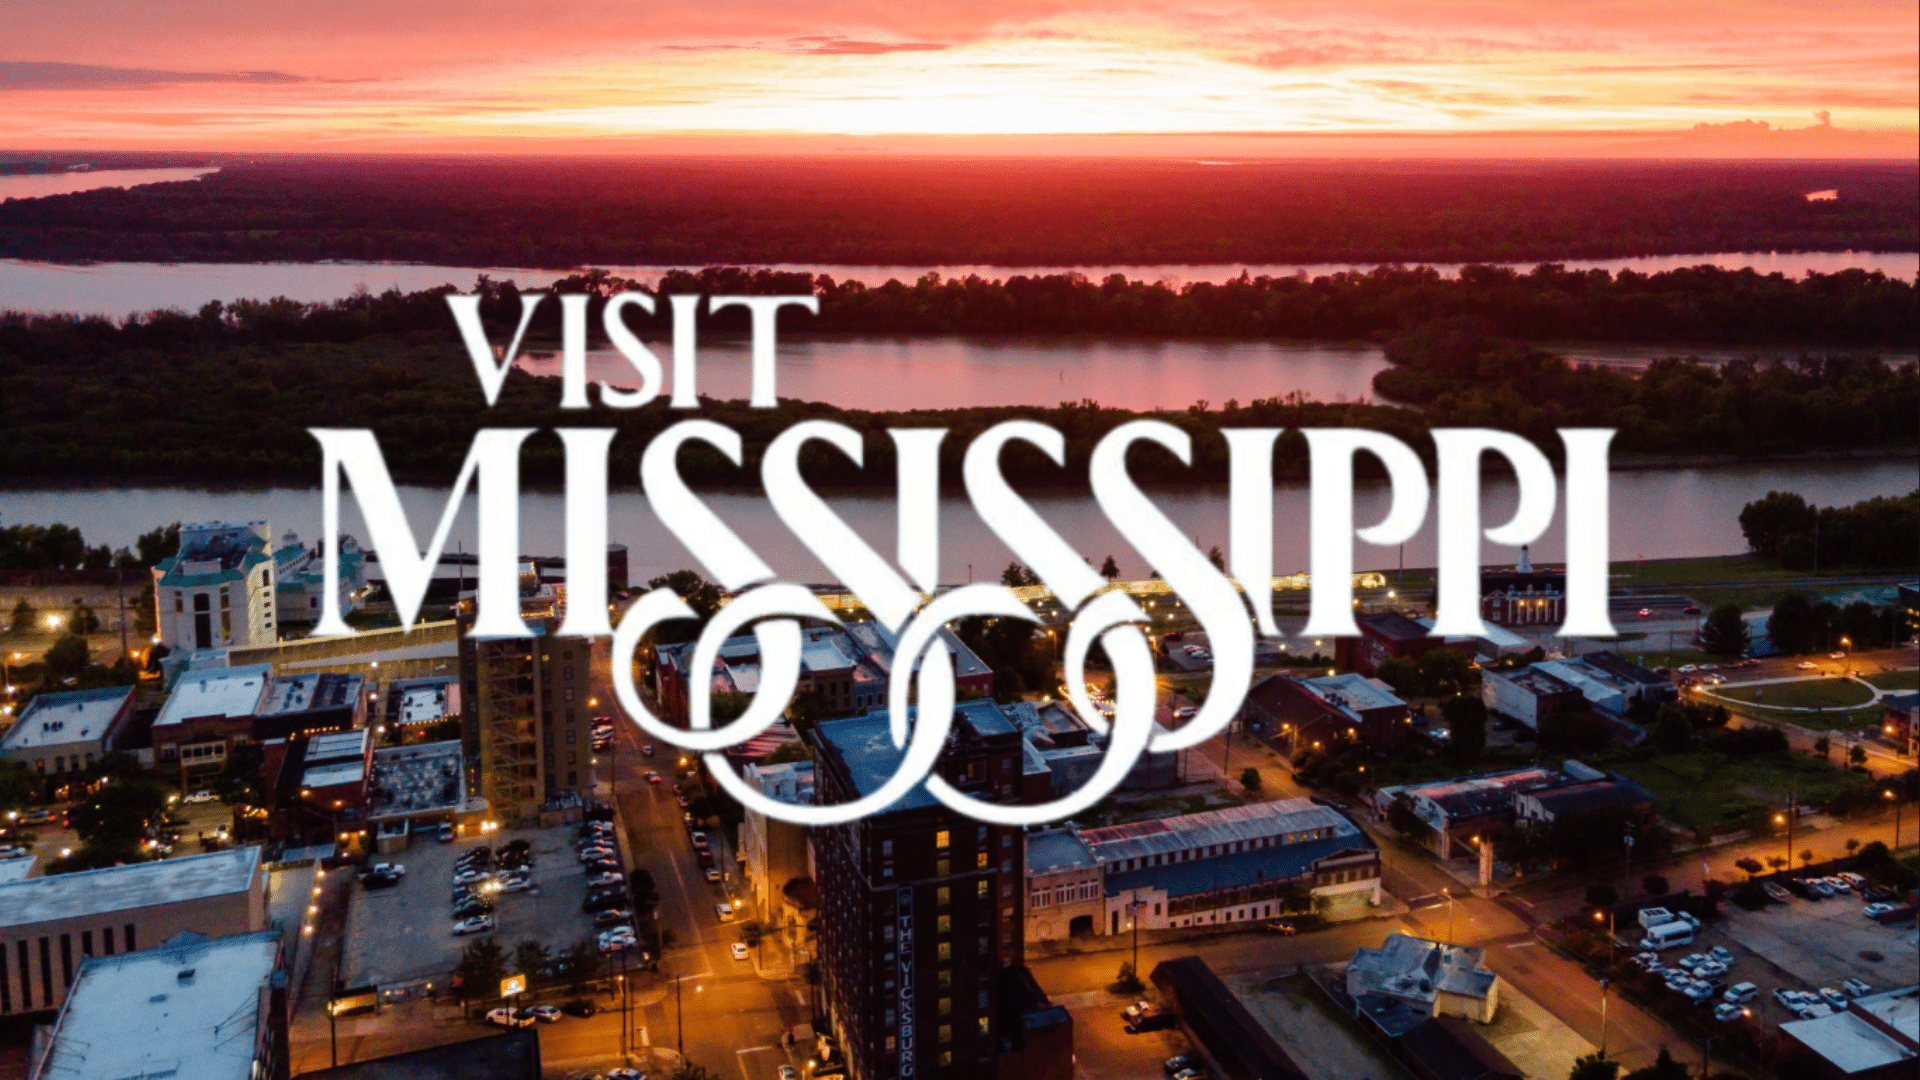 Mississippi town launches campaign to get young people to pull up